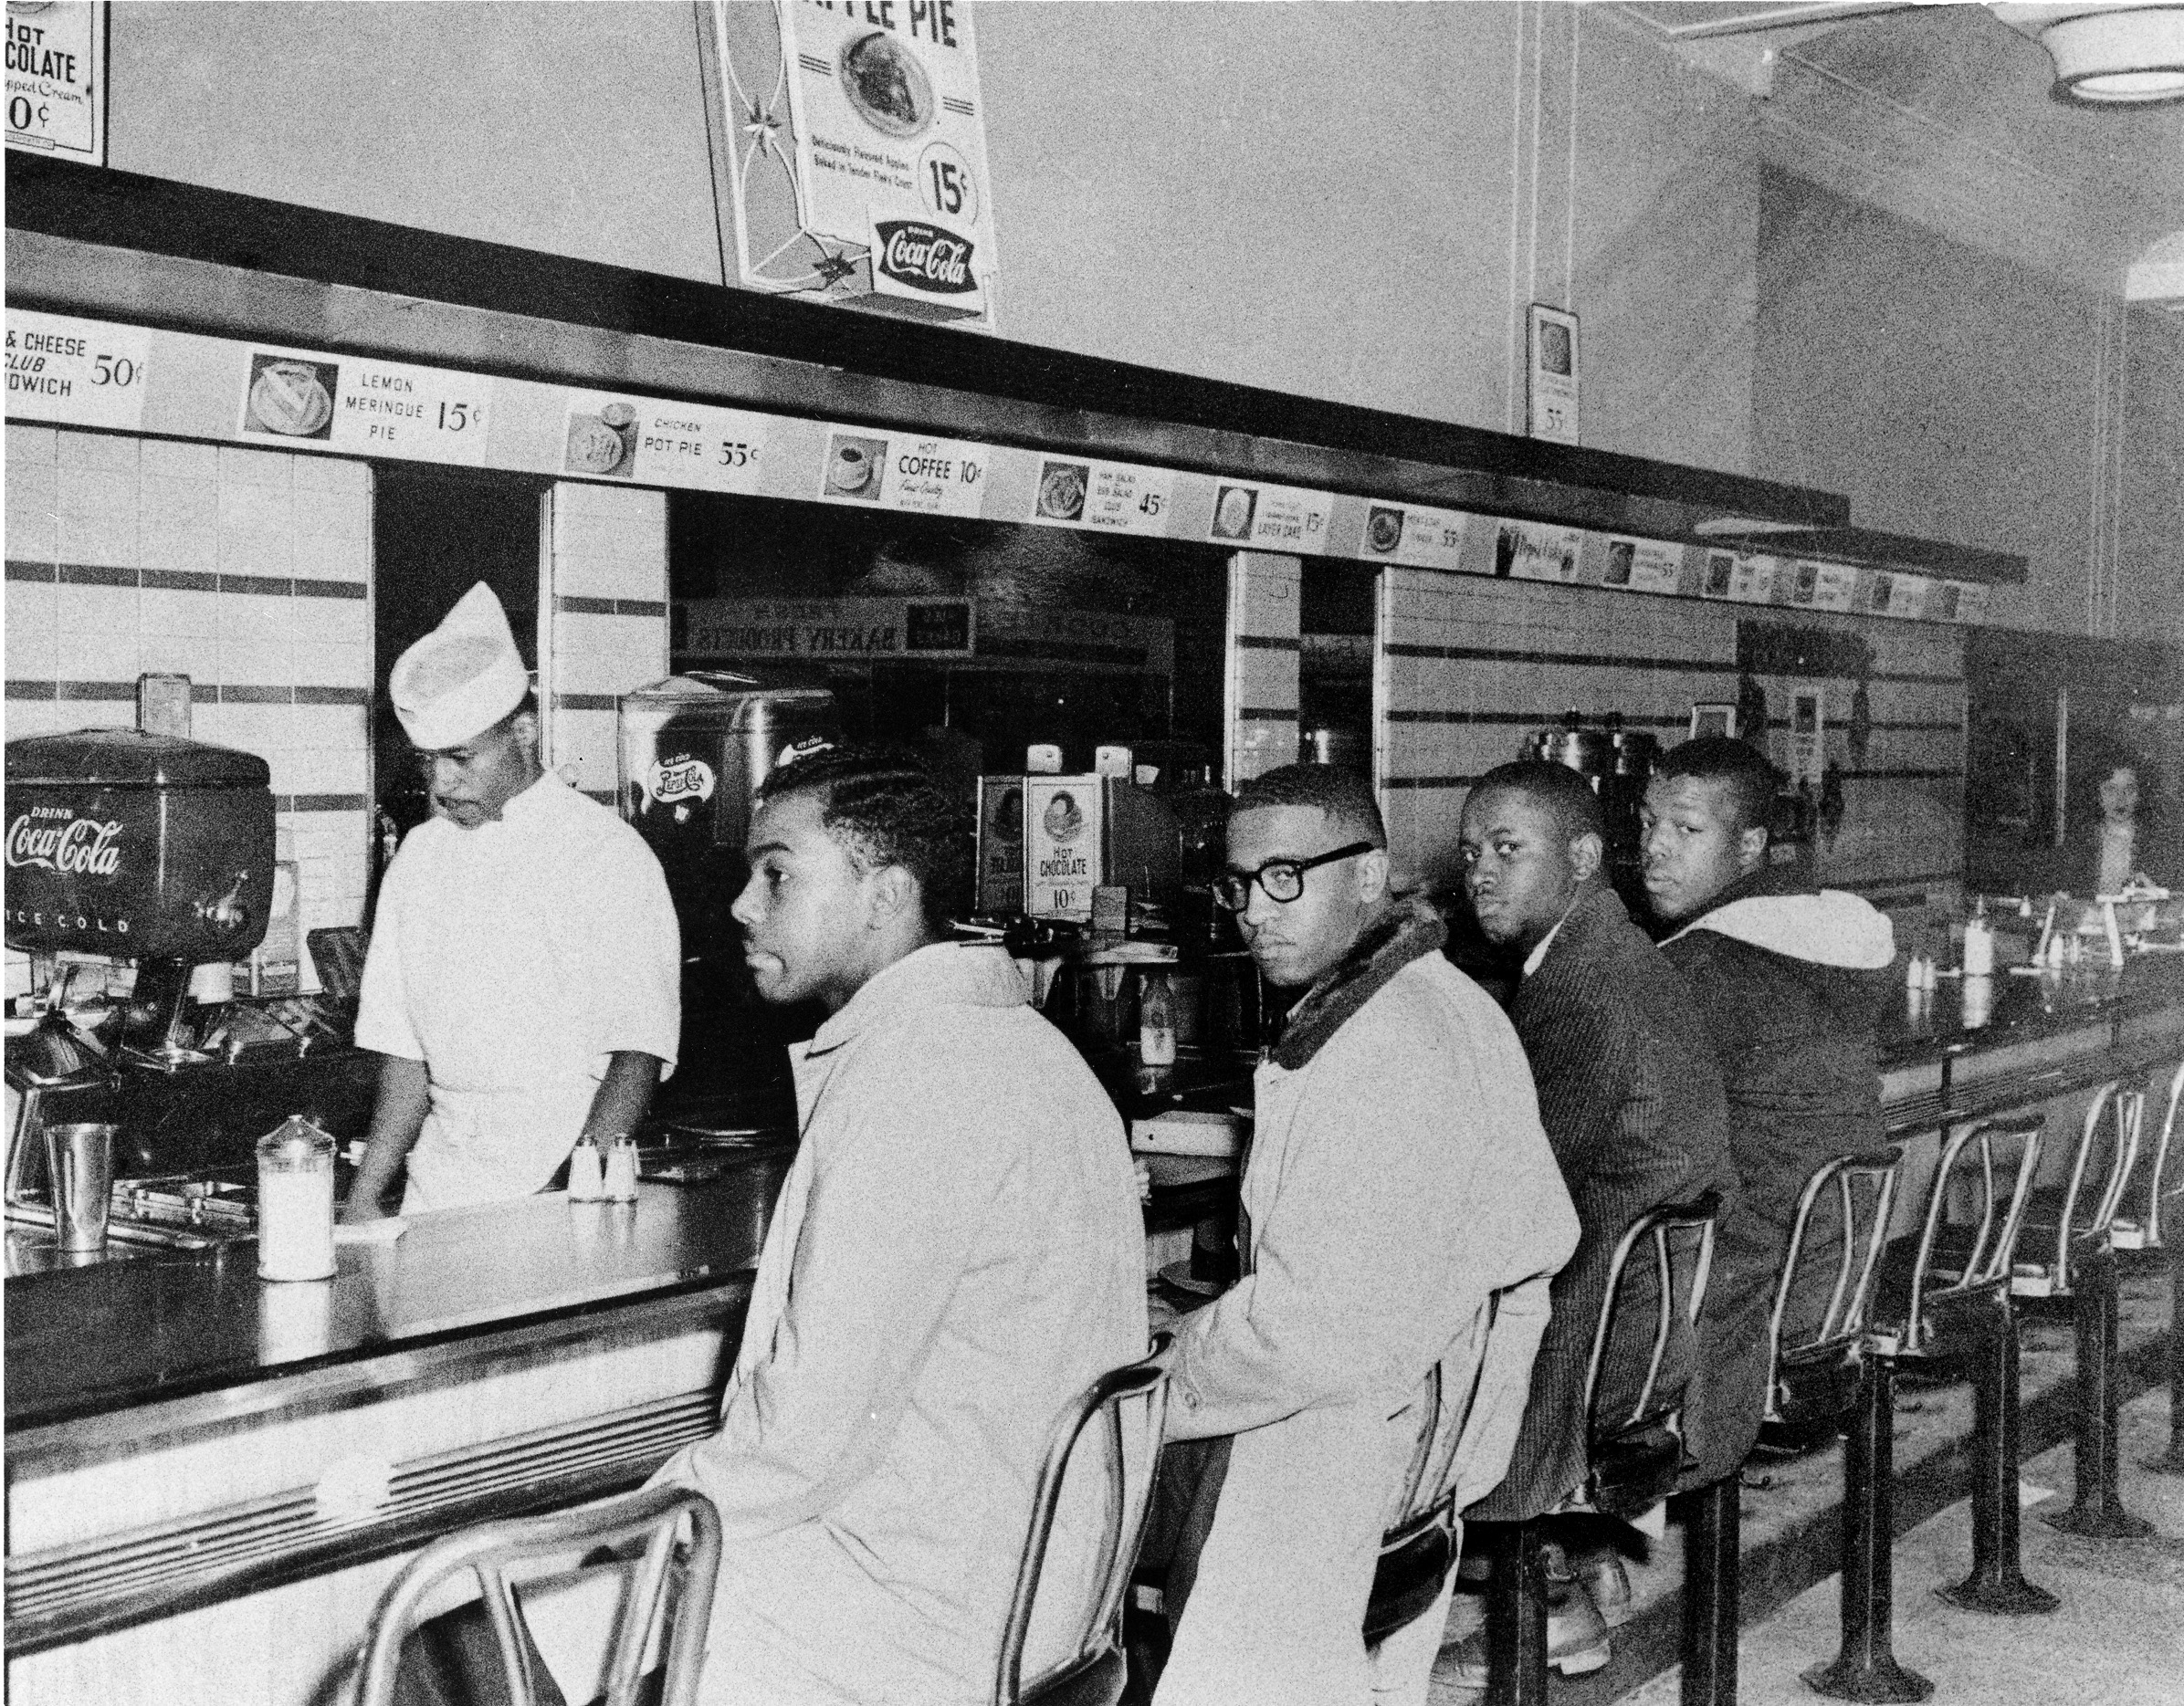 This is a historical photograph of four male African American students sitting at the counter of Woolworth in Greensboro, North Carolina, 1960.